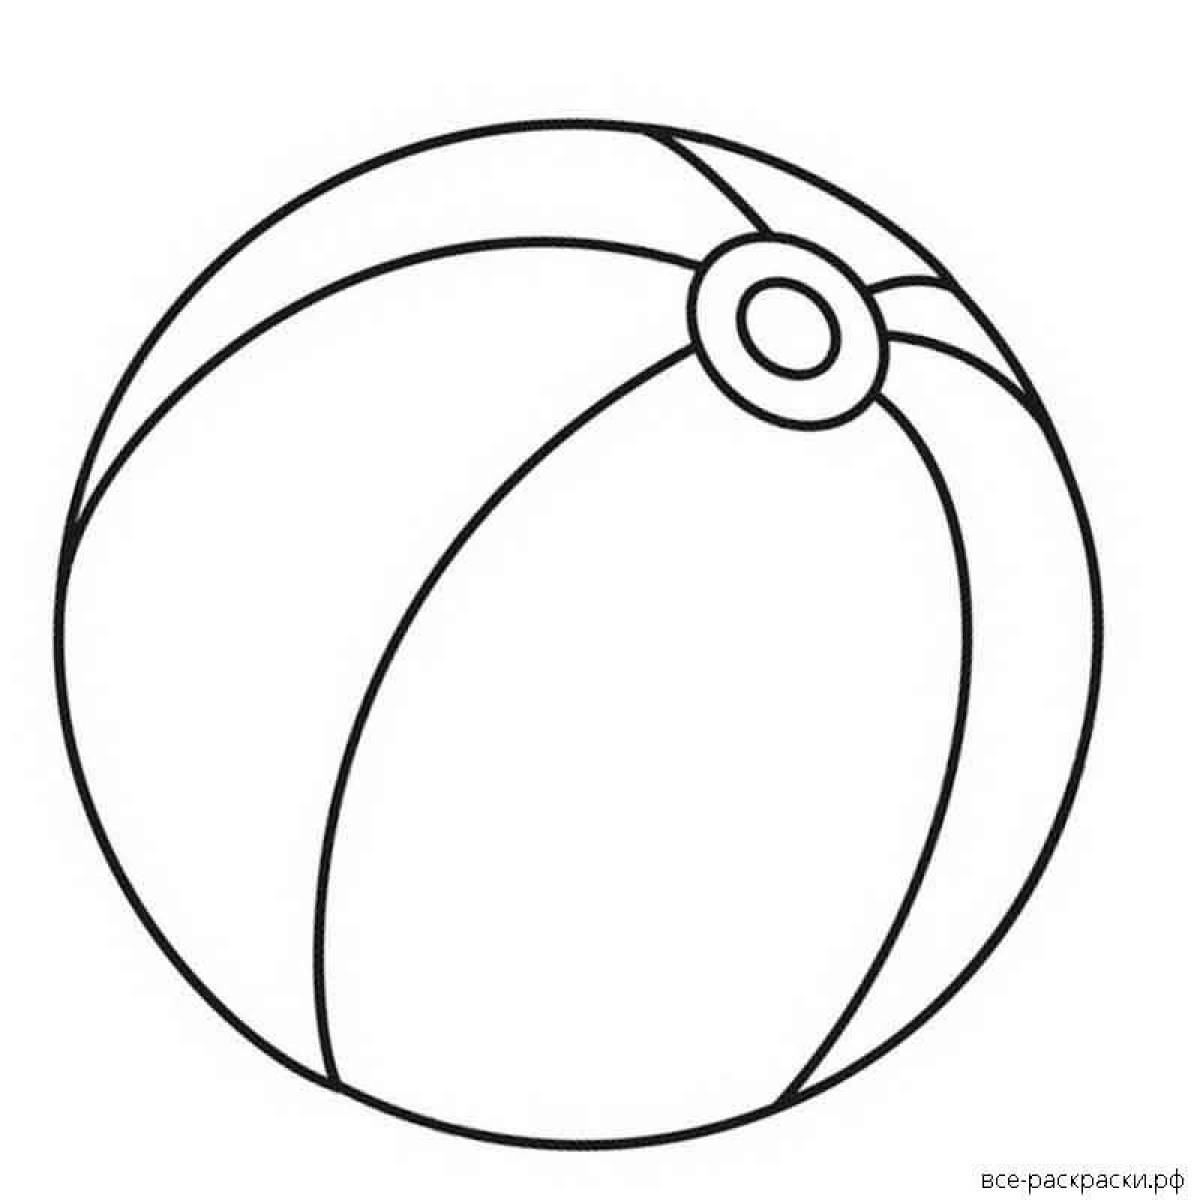 Coloring pages joyful ball for kids